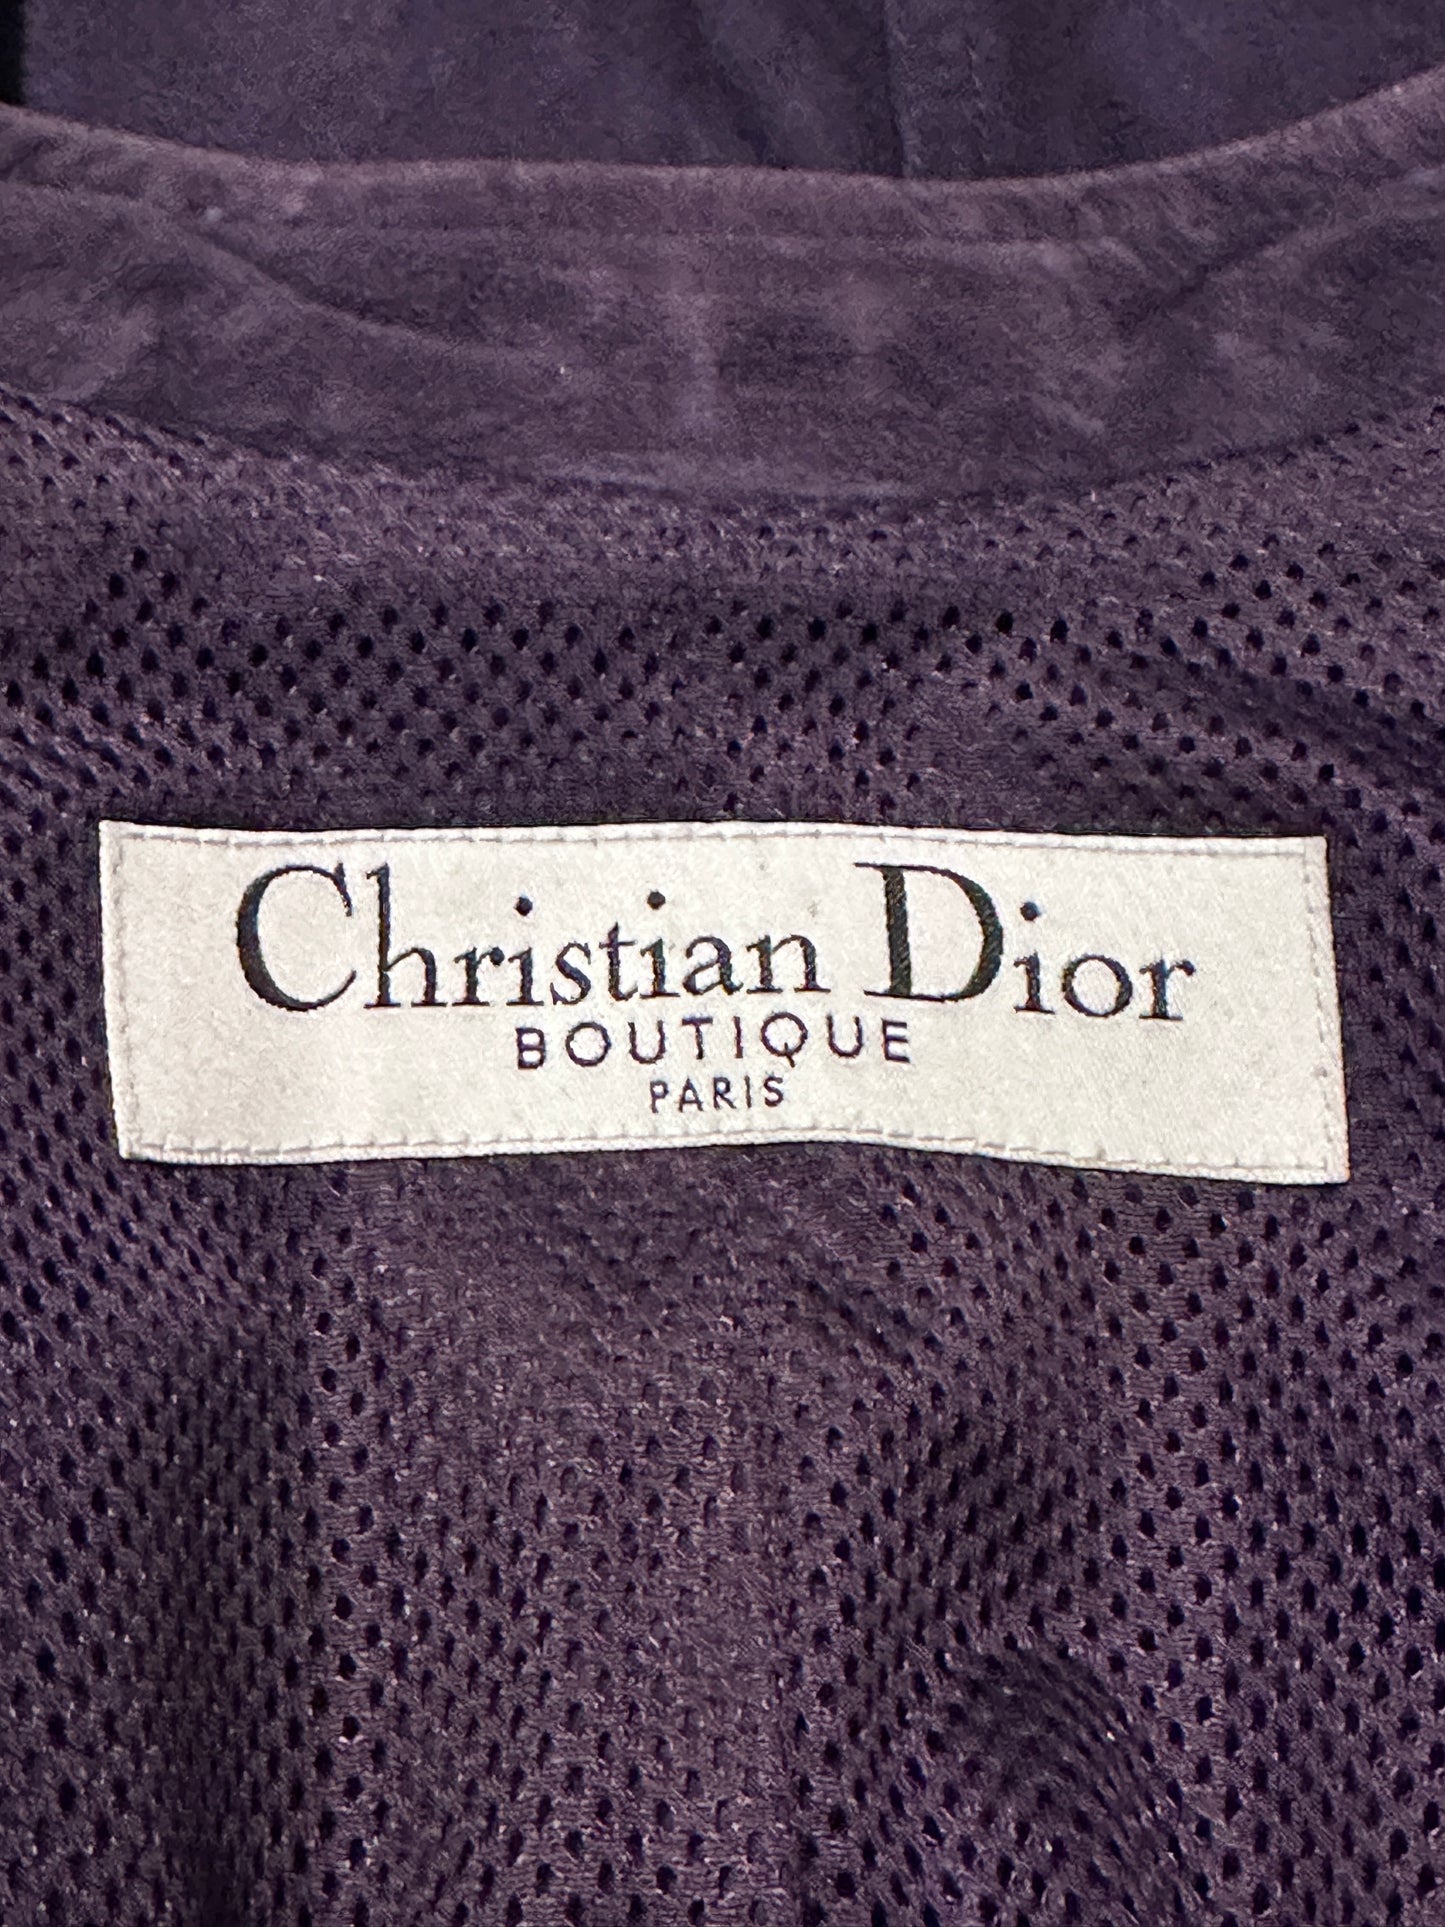 Christian Dior Boutique Soft Suede "Prince" Military Style Jacket (10)